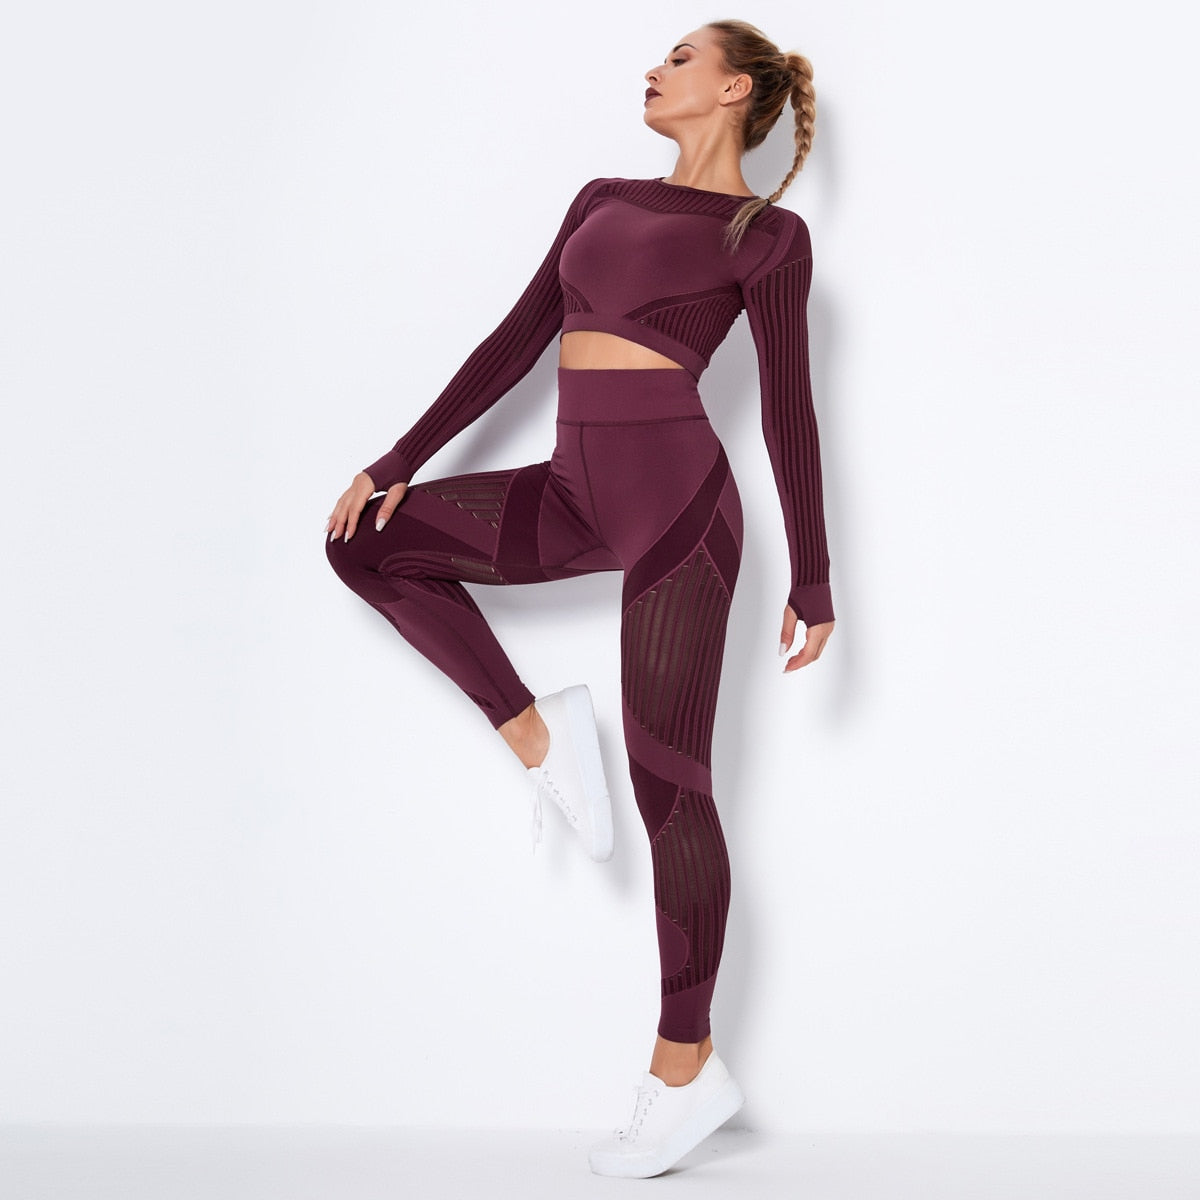 Workout Sets For Women 2 Piece Seamless Yoga Outfit Tracksuit High Waisted Yoga Leggings And Crop Top Gym Clothes Set   109.99 EZYSELLA SHOP